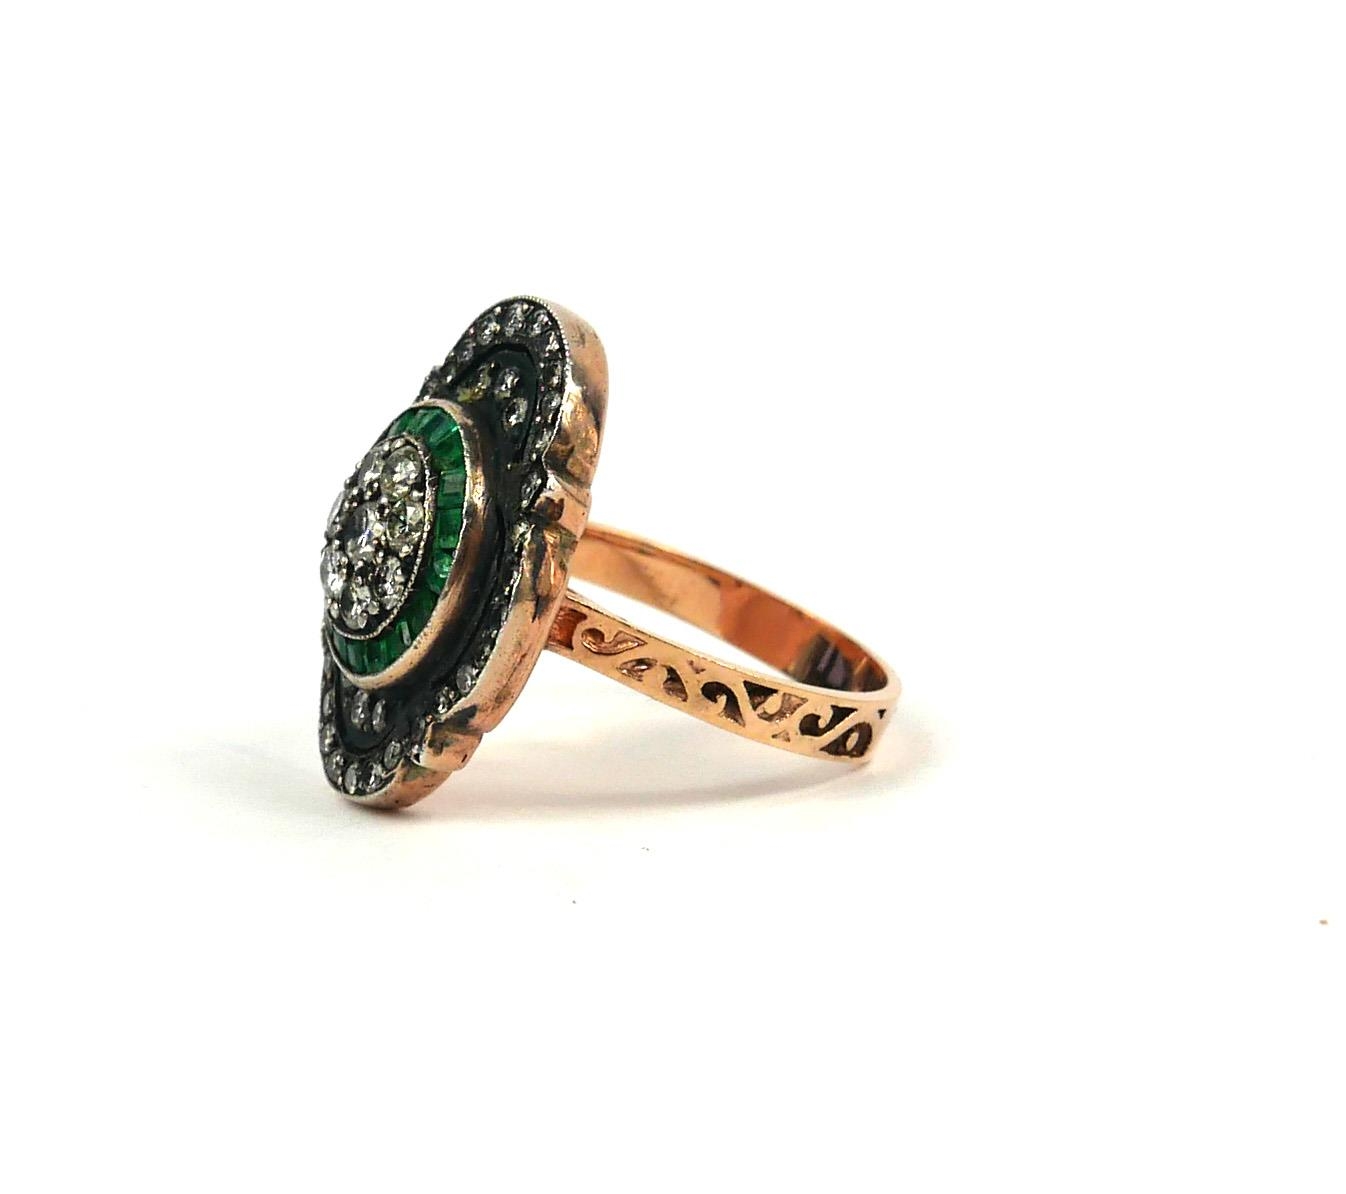 A VINTAGE STYLE 8CT ROSE GOLD (SILVER TOP) RING set with round diamonds and emeralds. - Image 3 of 3